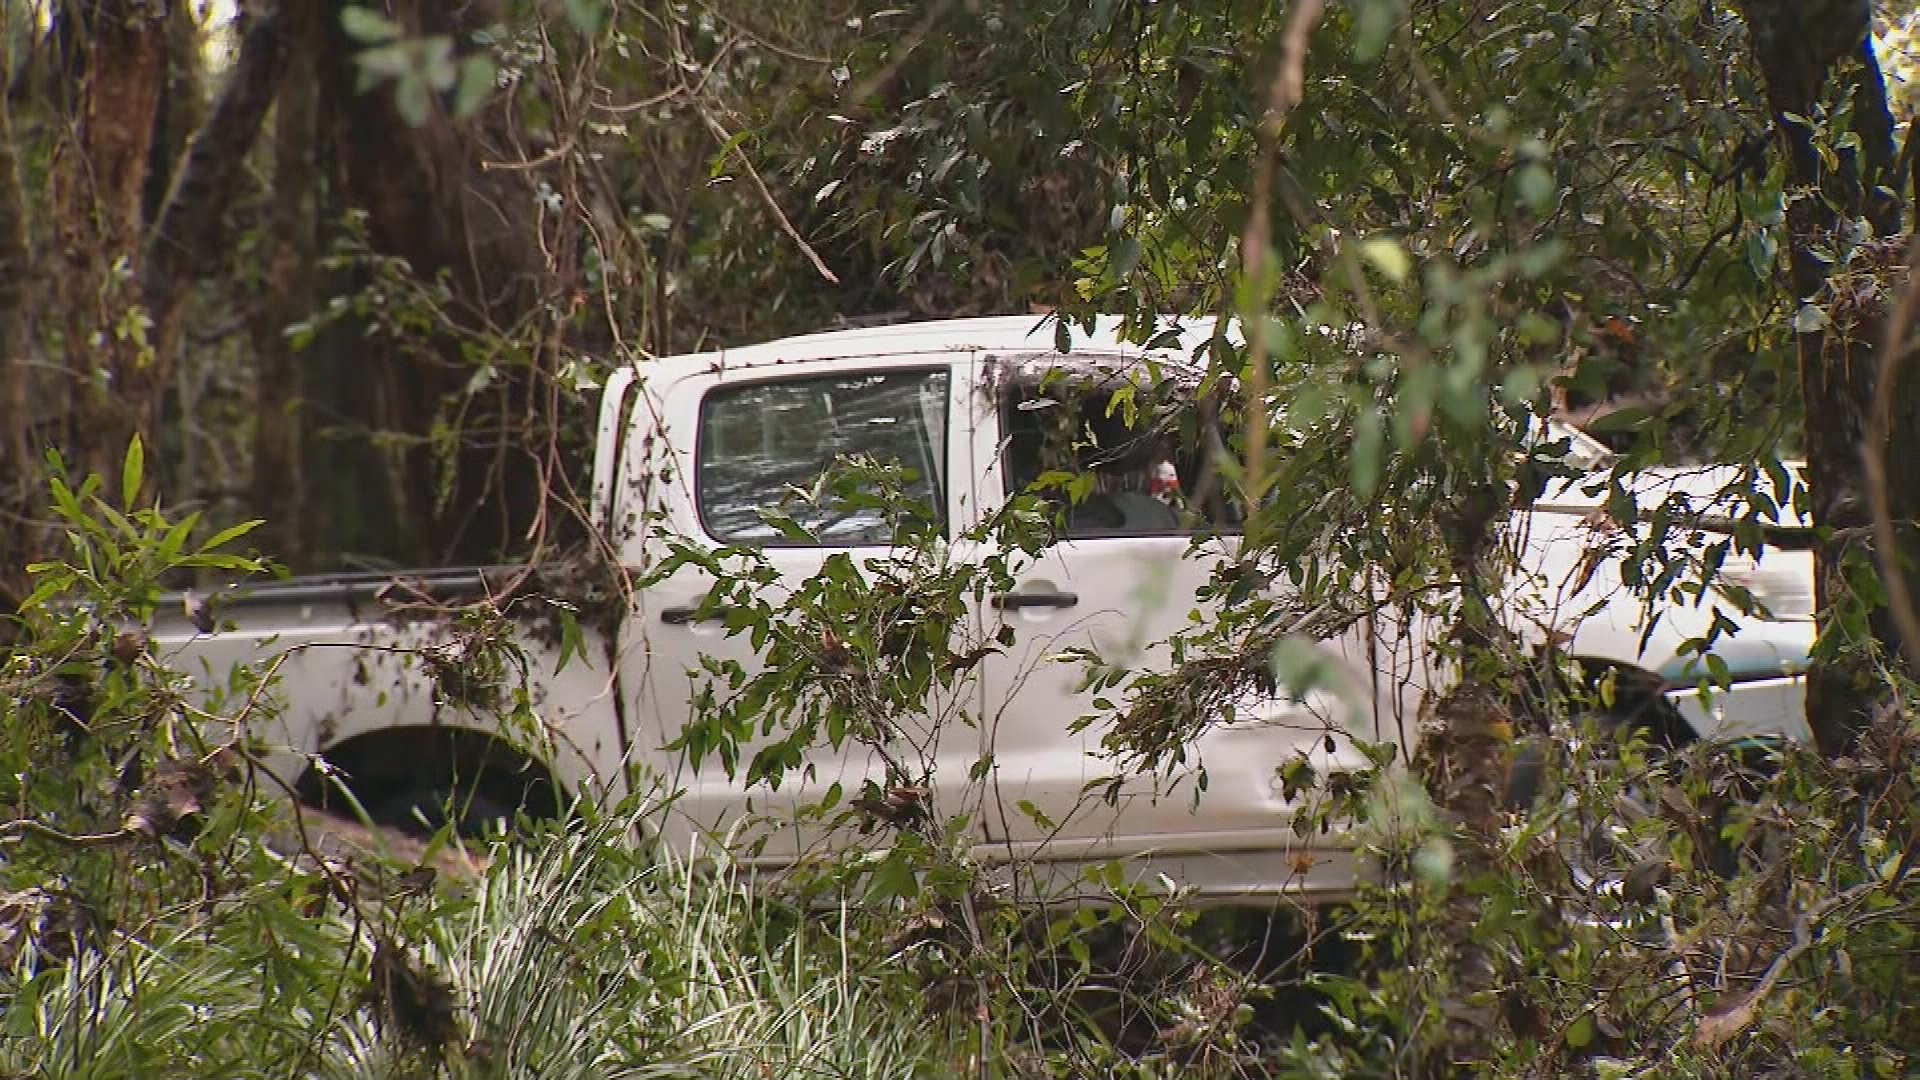 Queensland man found dead in floodwaters south of Brisbane